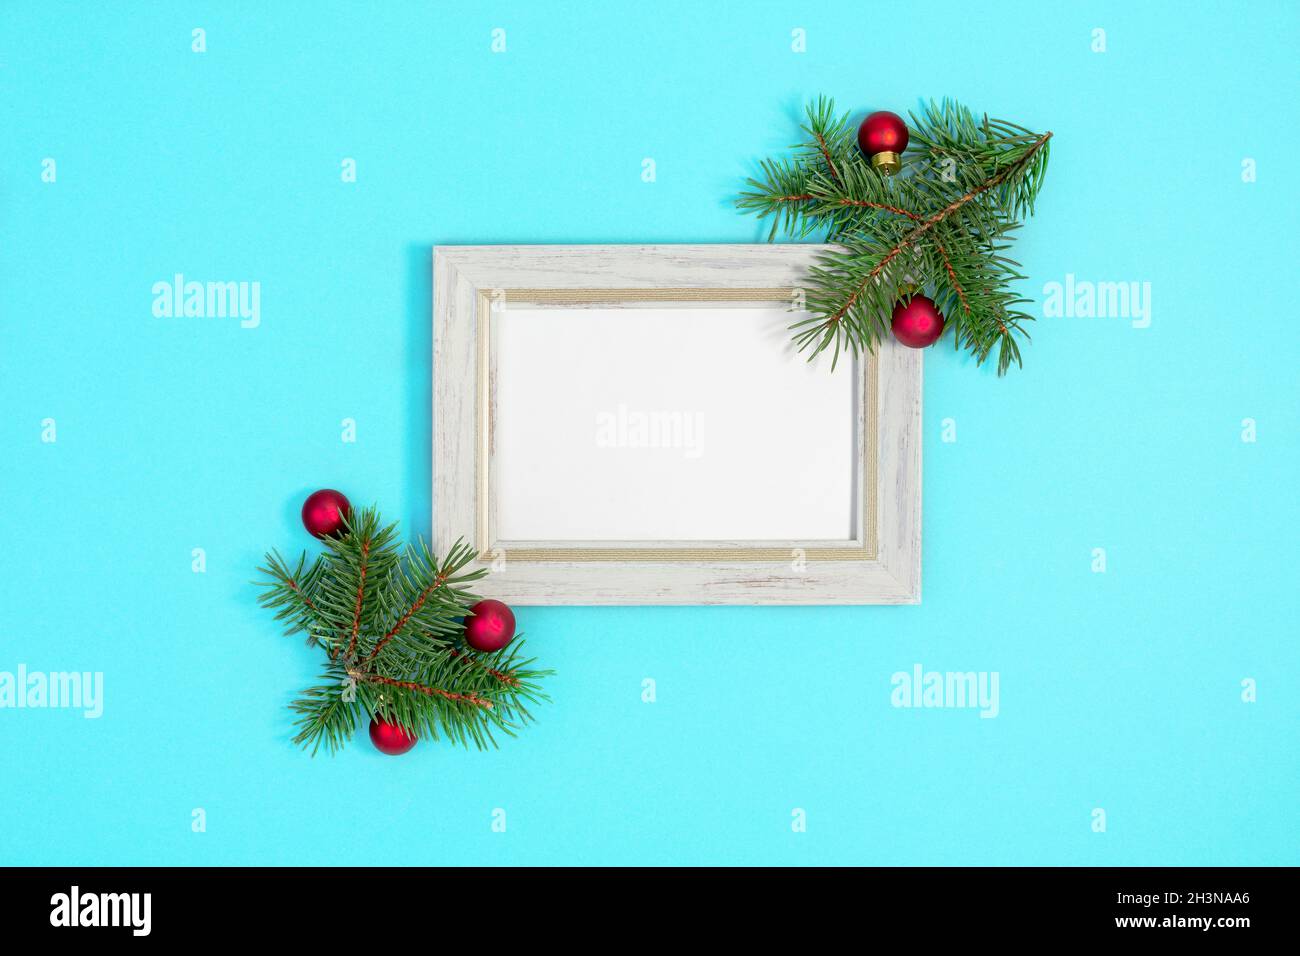 Christmas and New Year composition. Stock Photo